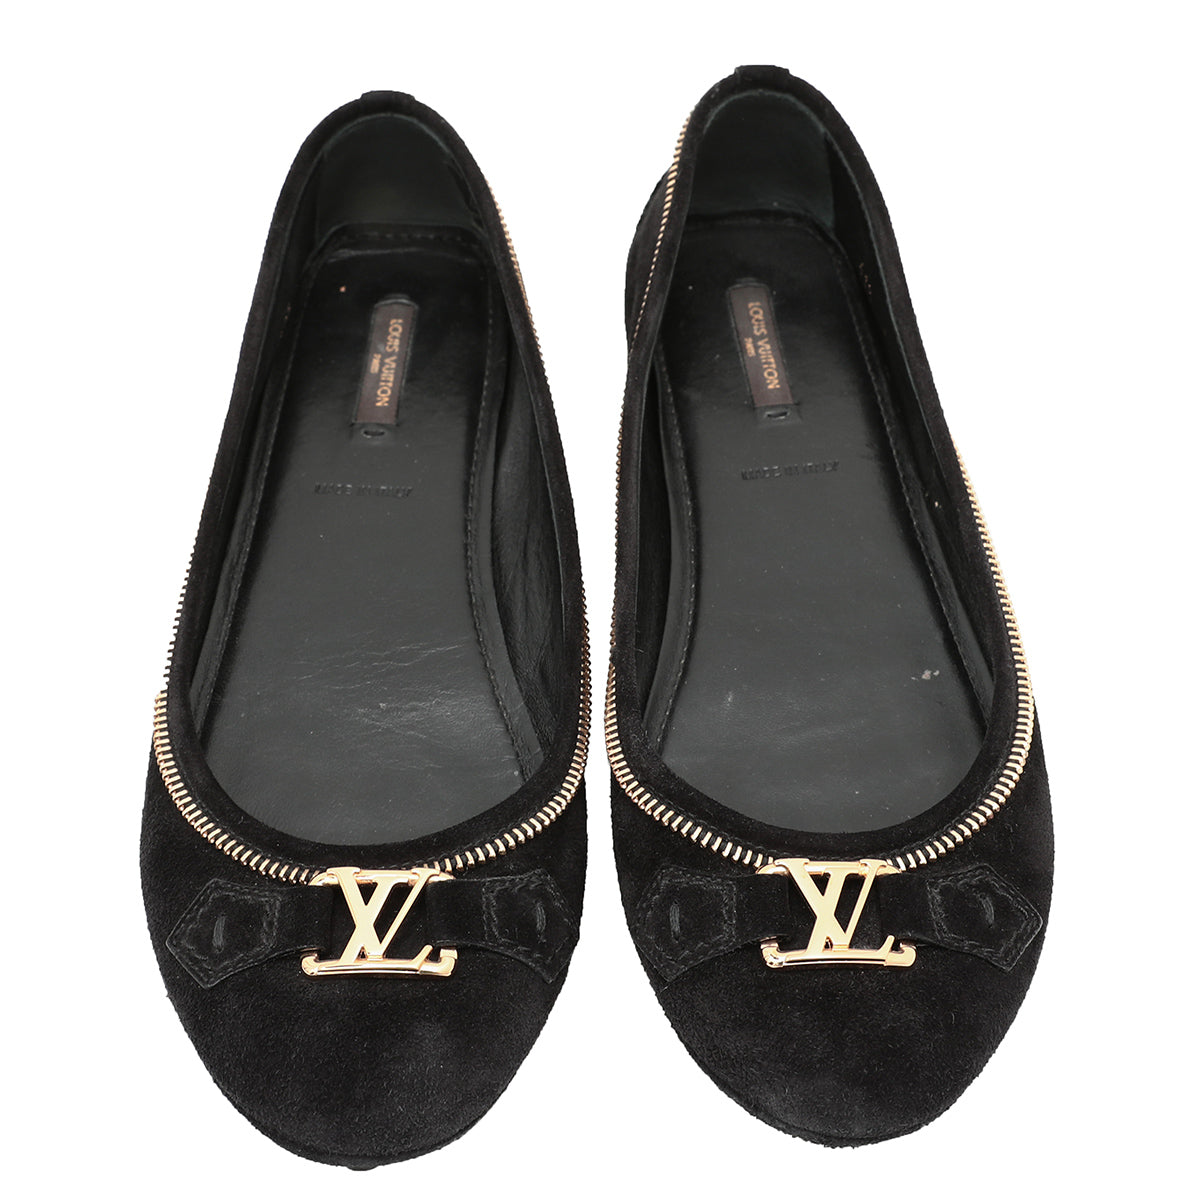 Flats Louis Vuitton Brown size 9 US in Suede - 27476598